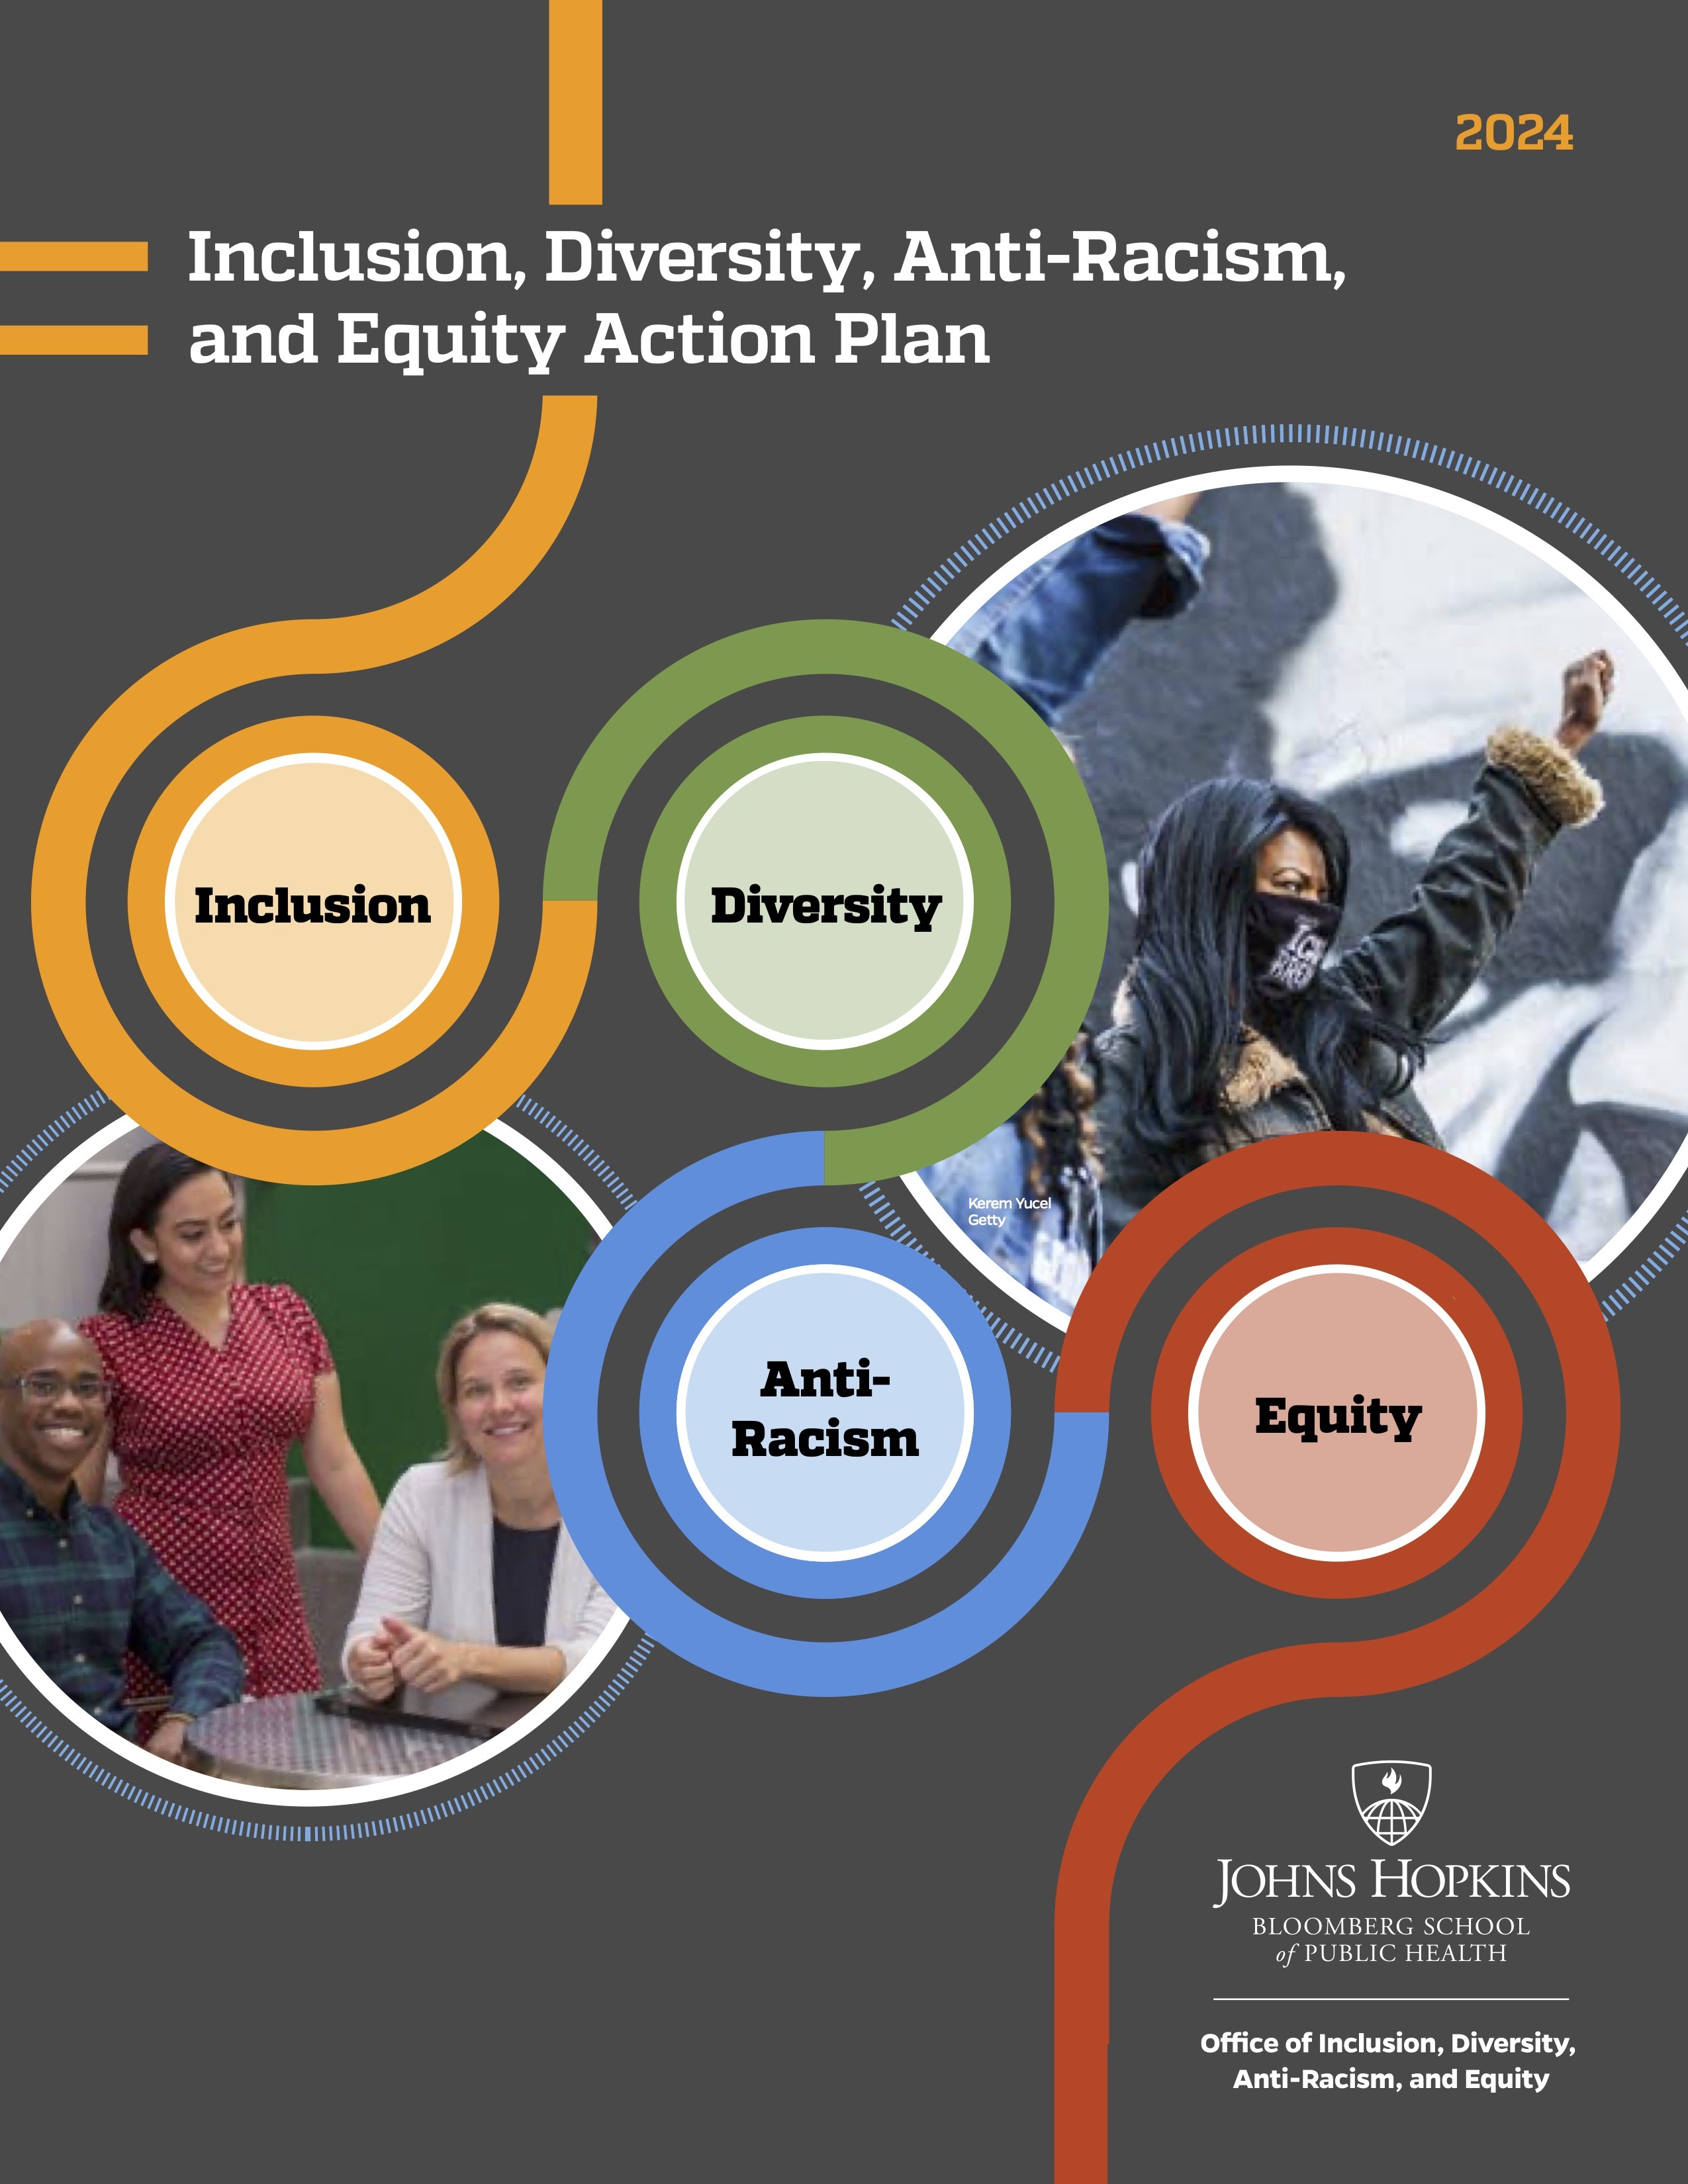 Inclusion, Diversity, Anti-Racism, and Equity Action Plan 2024